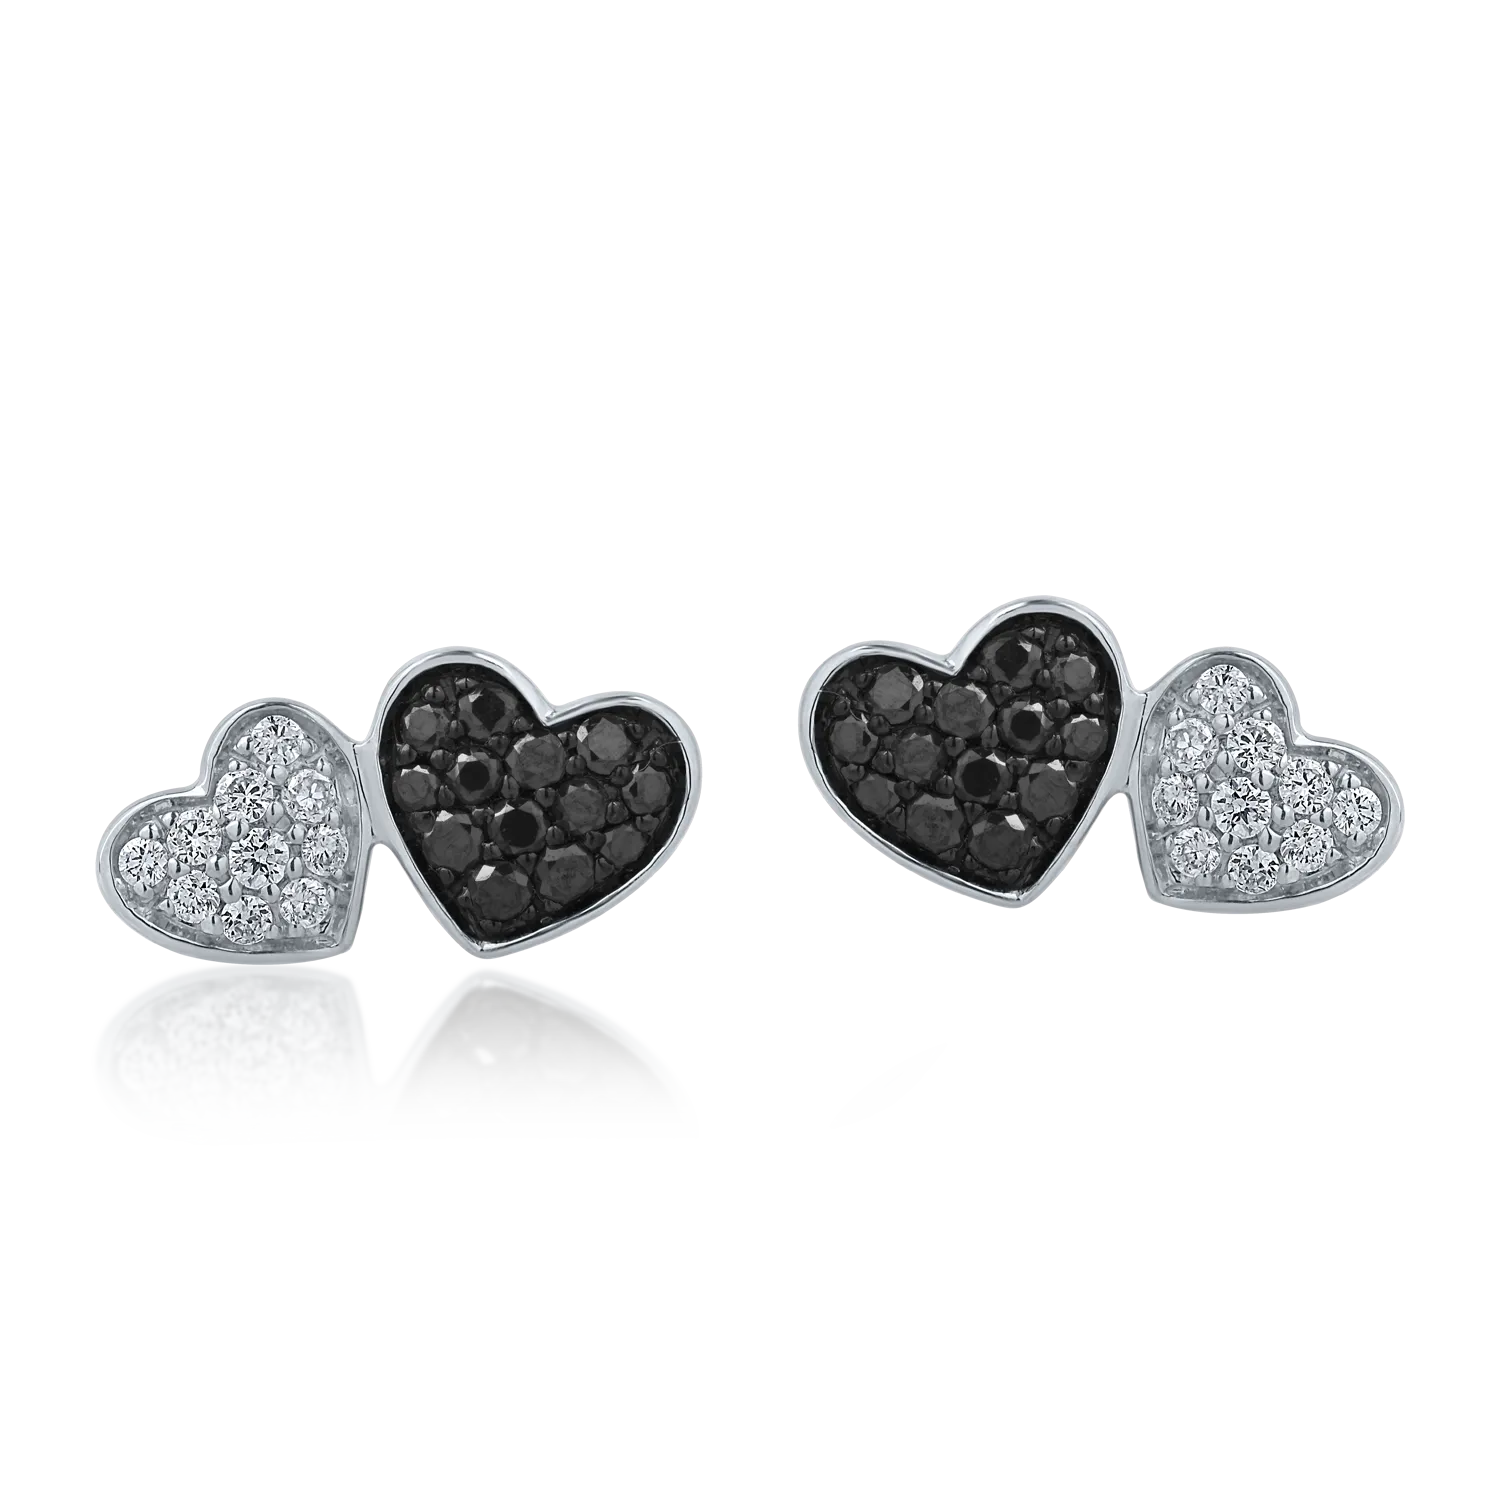 White gold heart earrings with 0.13ct black diamonds and 0.07ct clear diamonds